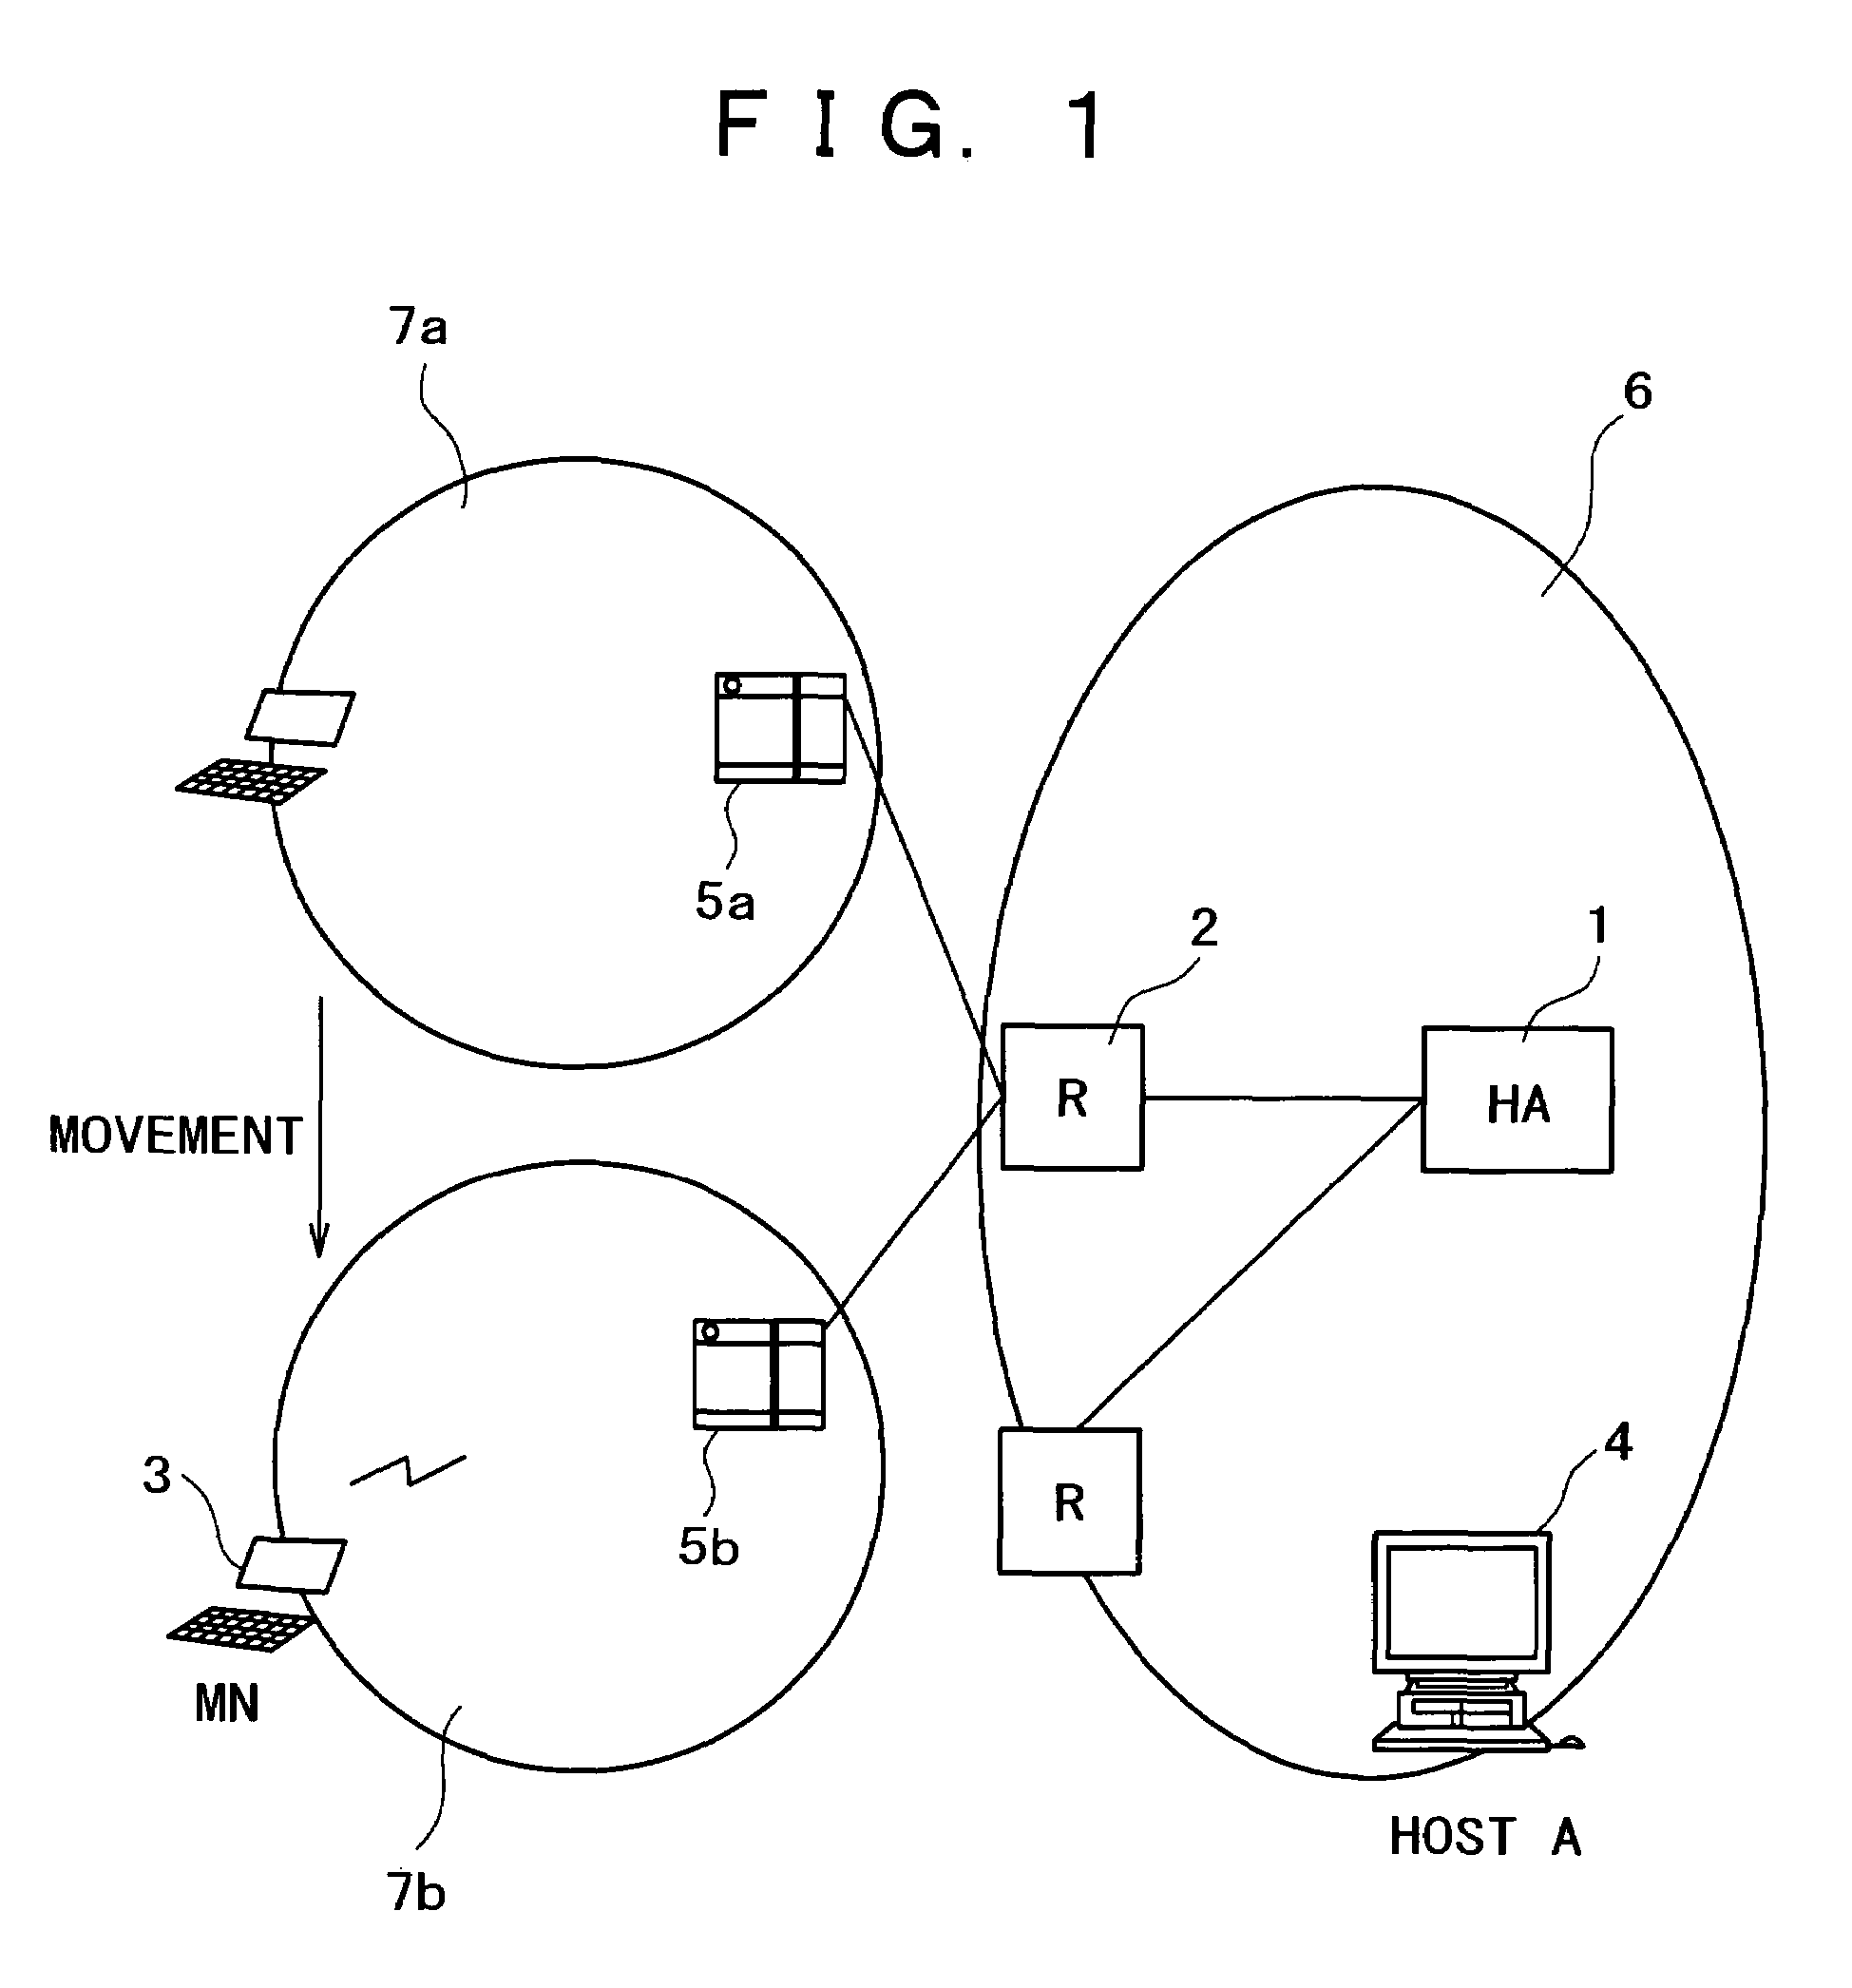 Method and apparatus for mobile communication utilizing load balancing